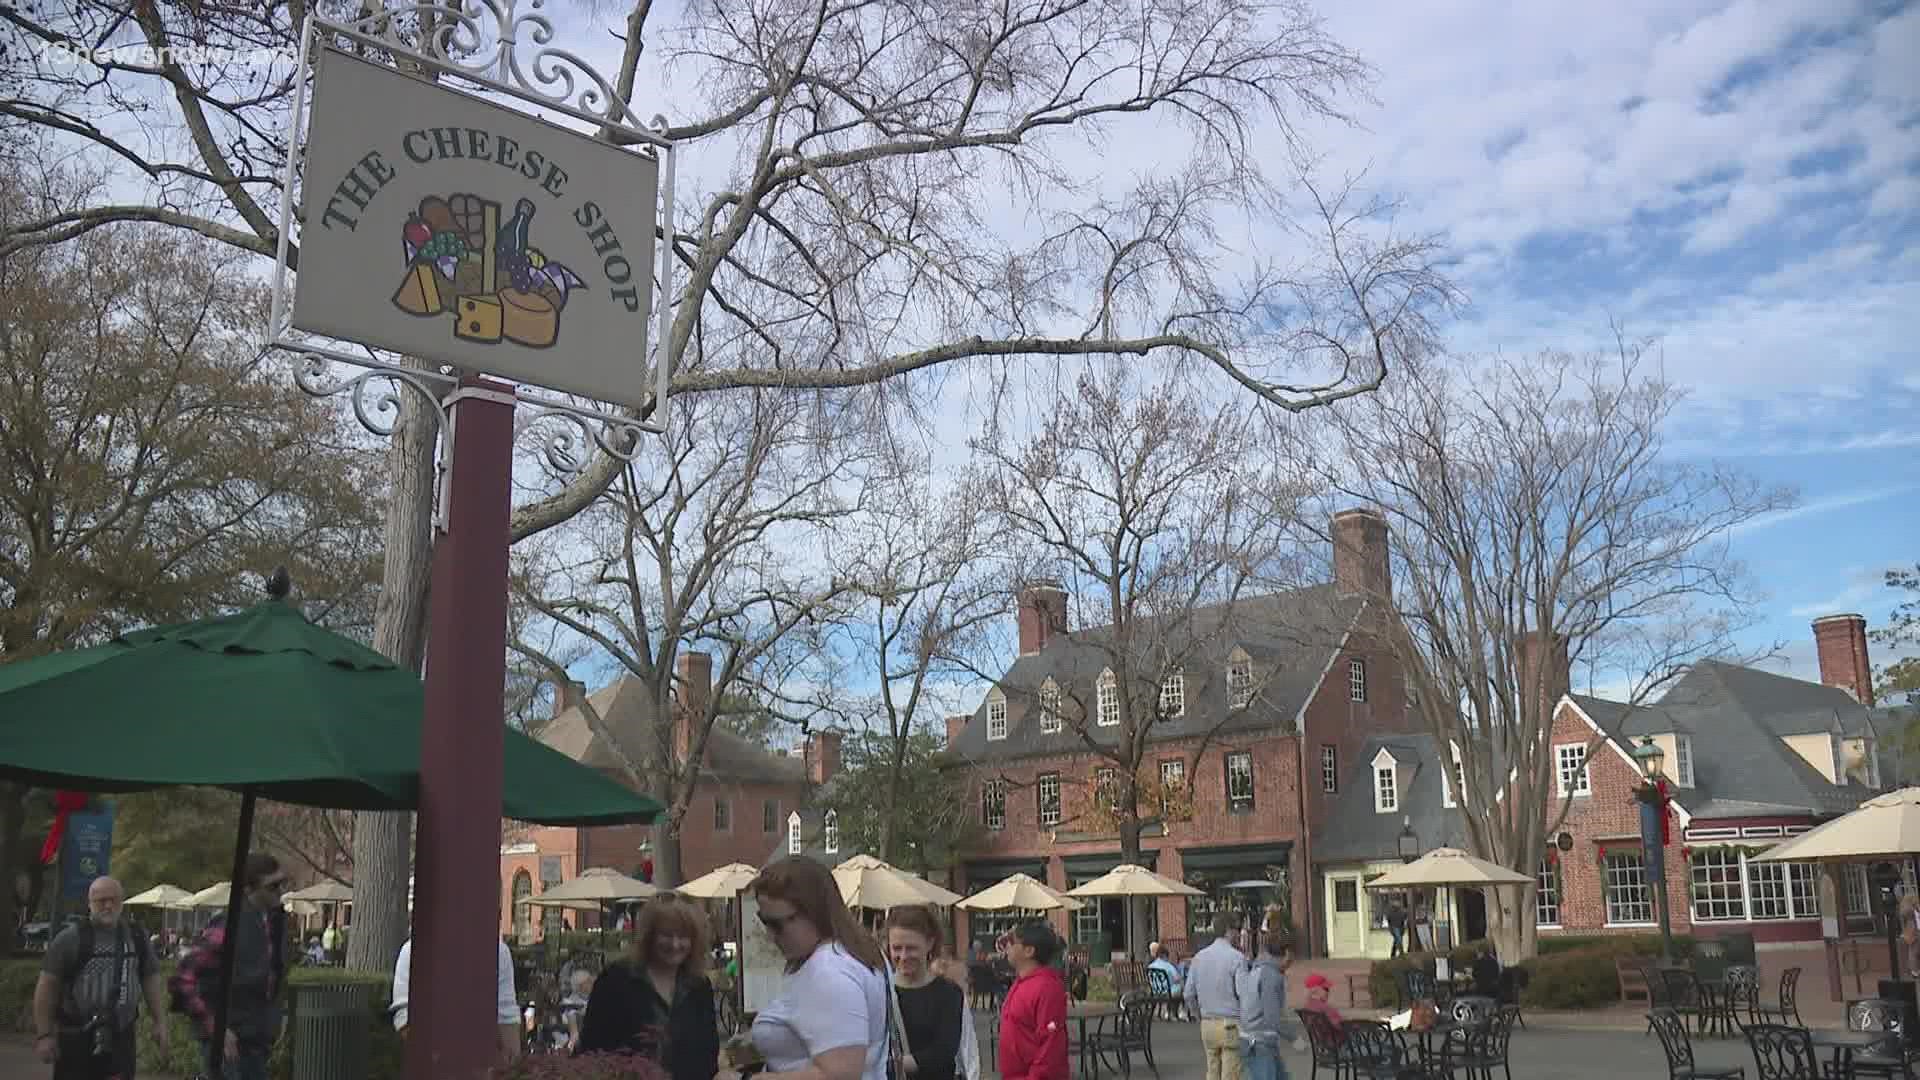 The popular Colonial Williamsburg business temporarily suspended its sandwich-making service in December because of staffing shortages.